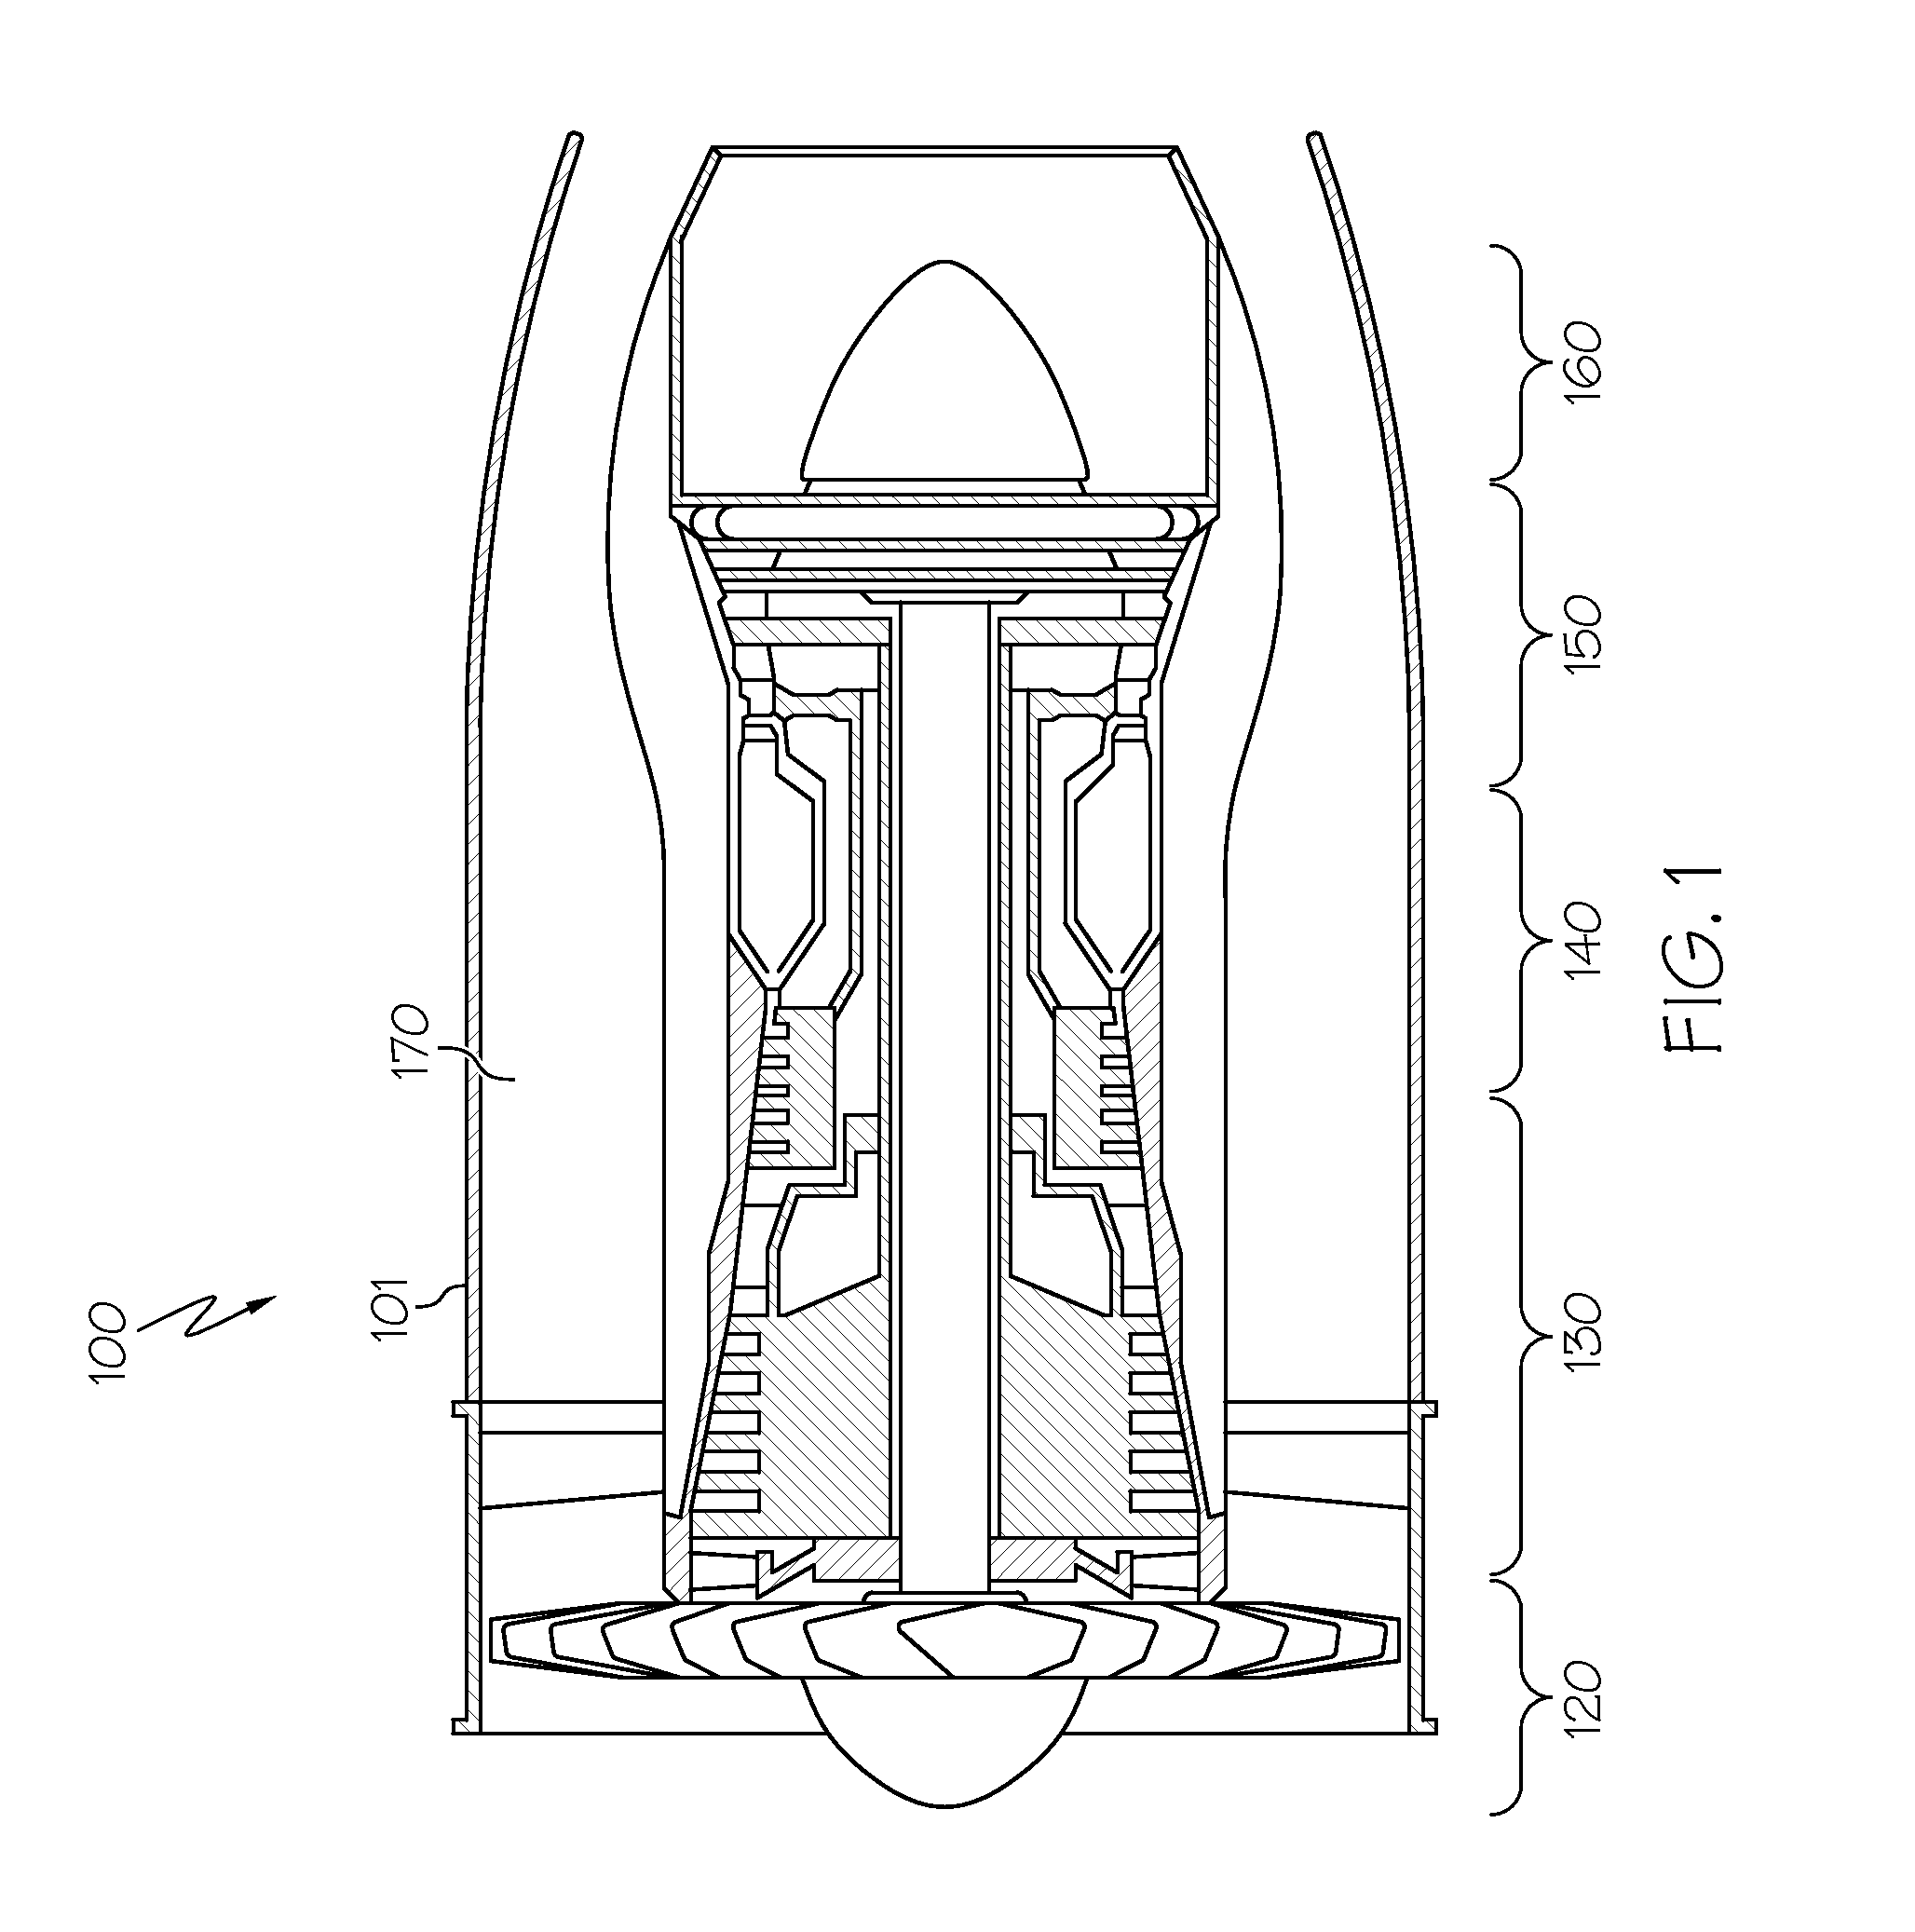 Turbine rotor blades with improved tip portion cooling holes